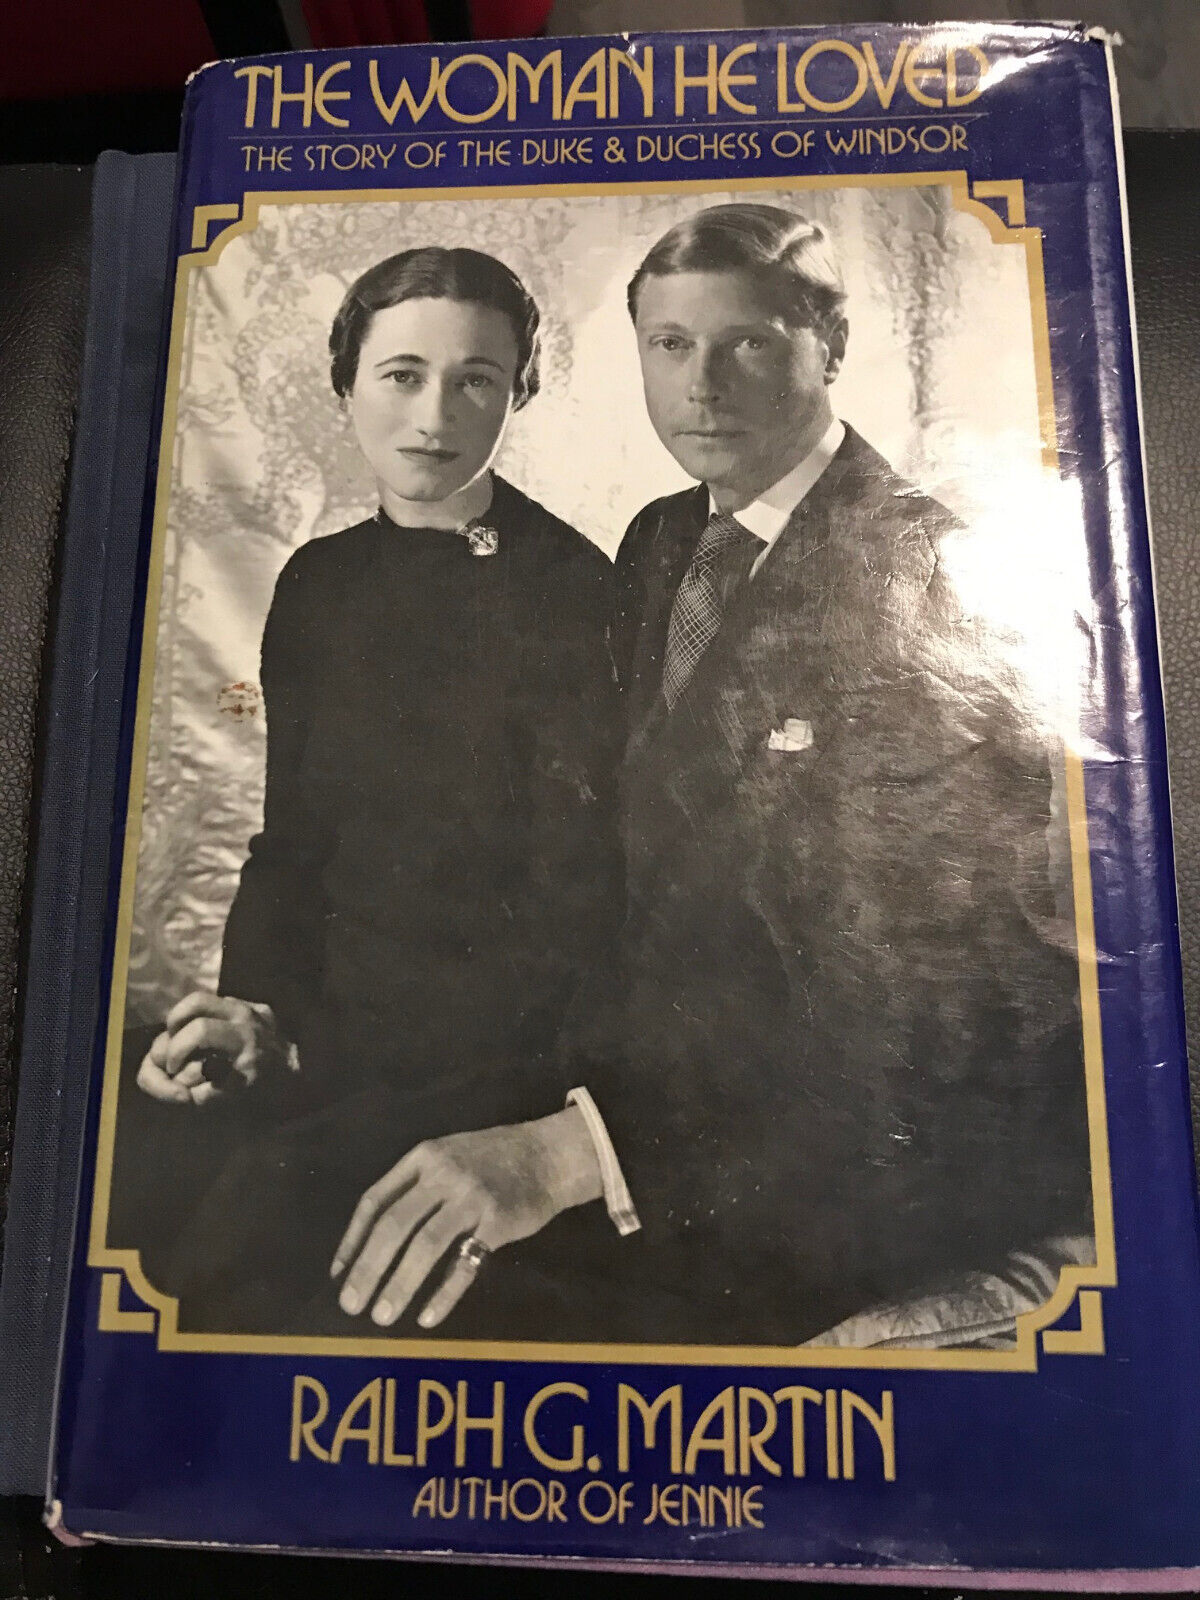 SIGNED by WALLIS, DUCHESS OF WINDSOR - The Woman he Loved by Ralph G. Martin